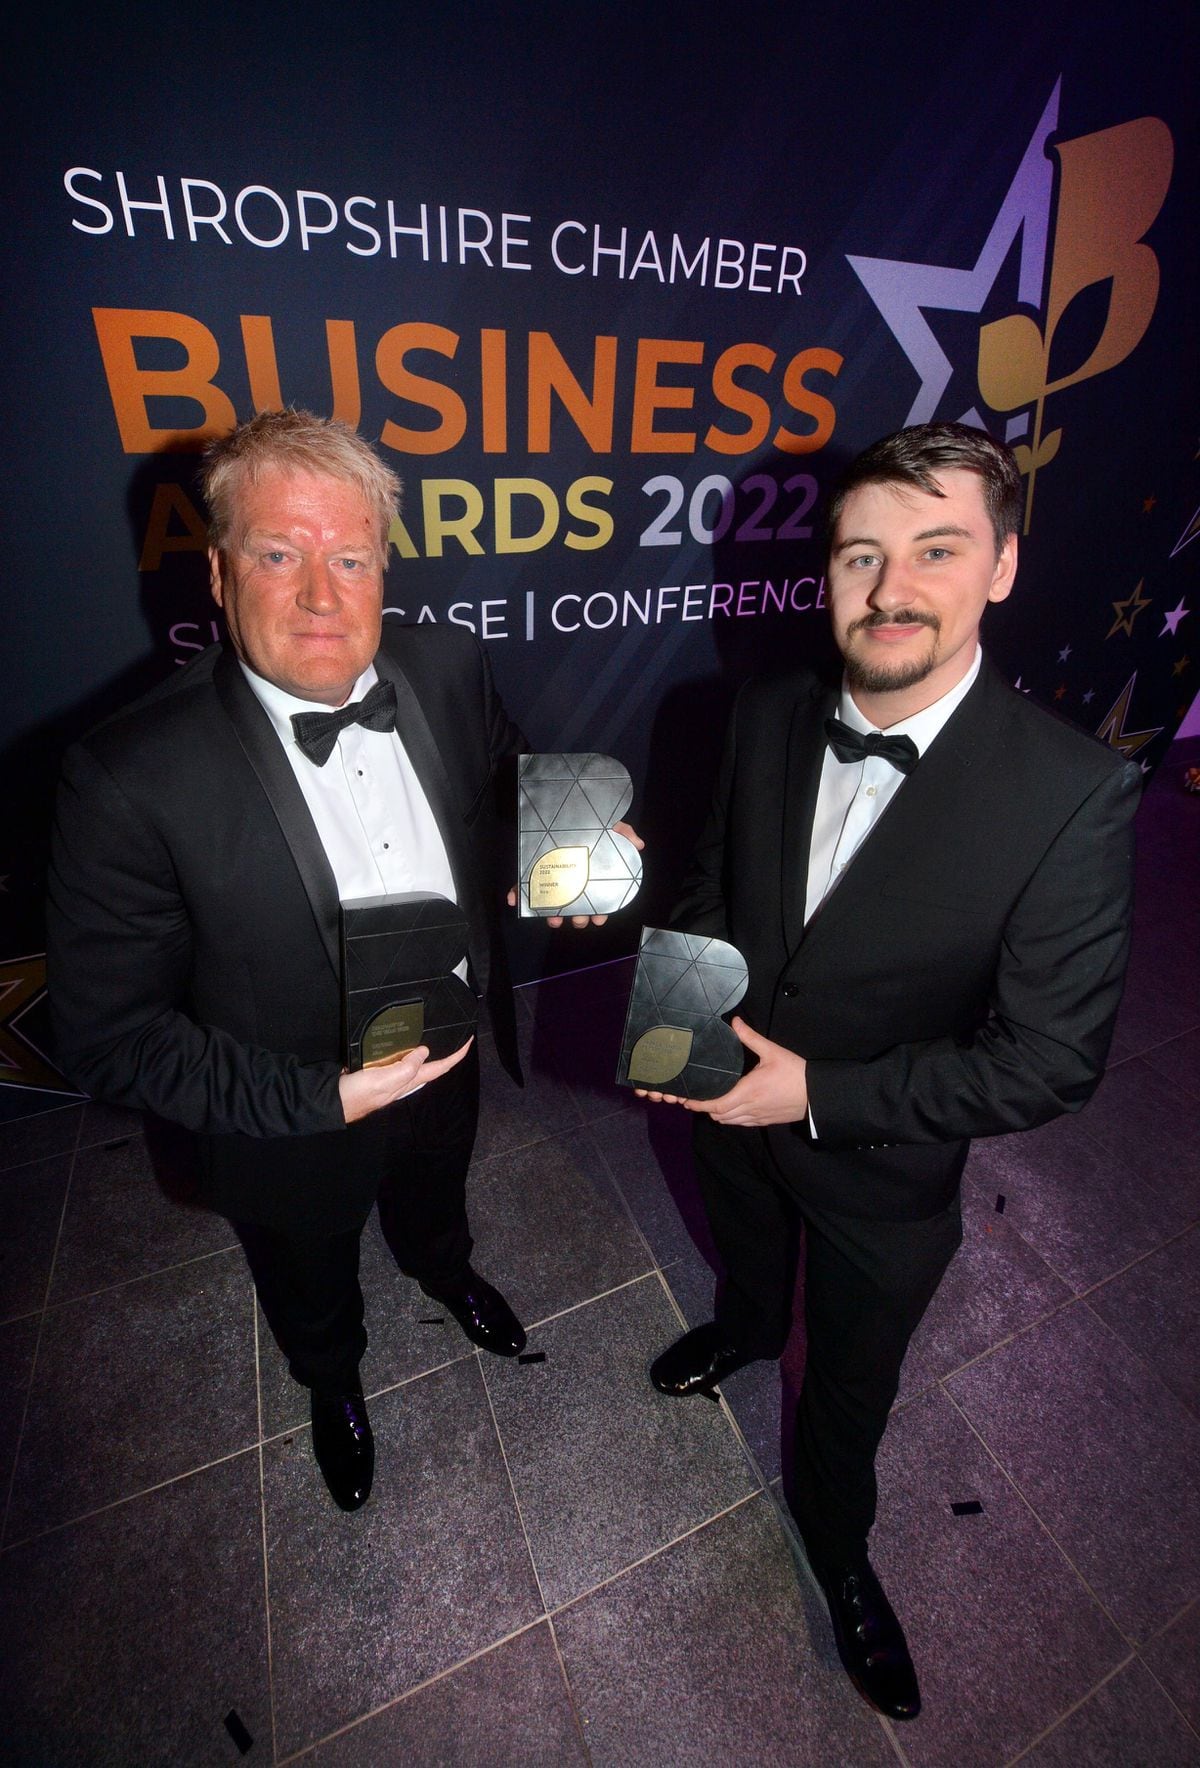 The Young Business Person award went to Samuel Marston from Aico. Pictured with Samuel is Aico MD Neal Hooper